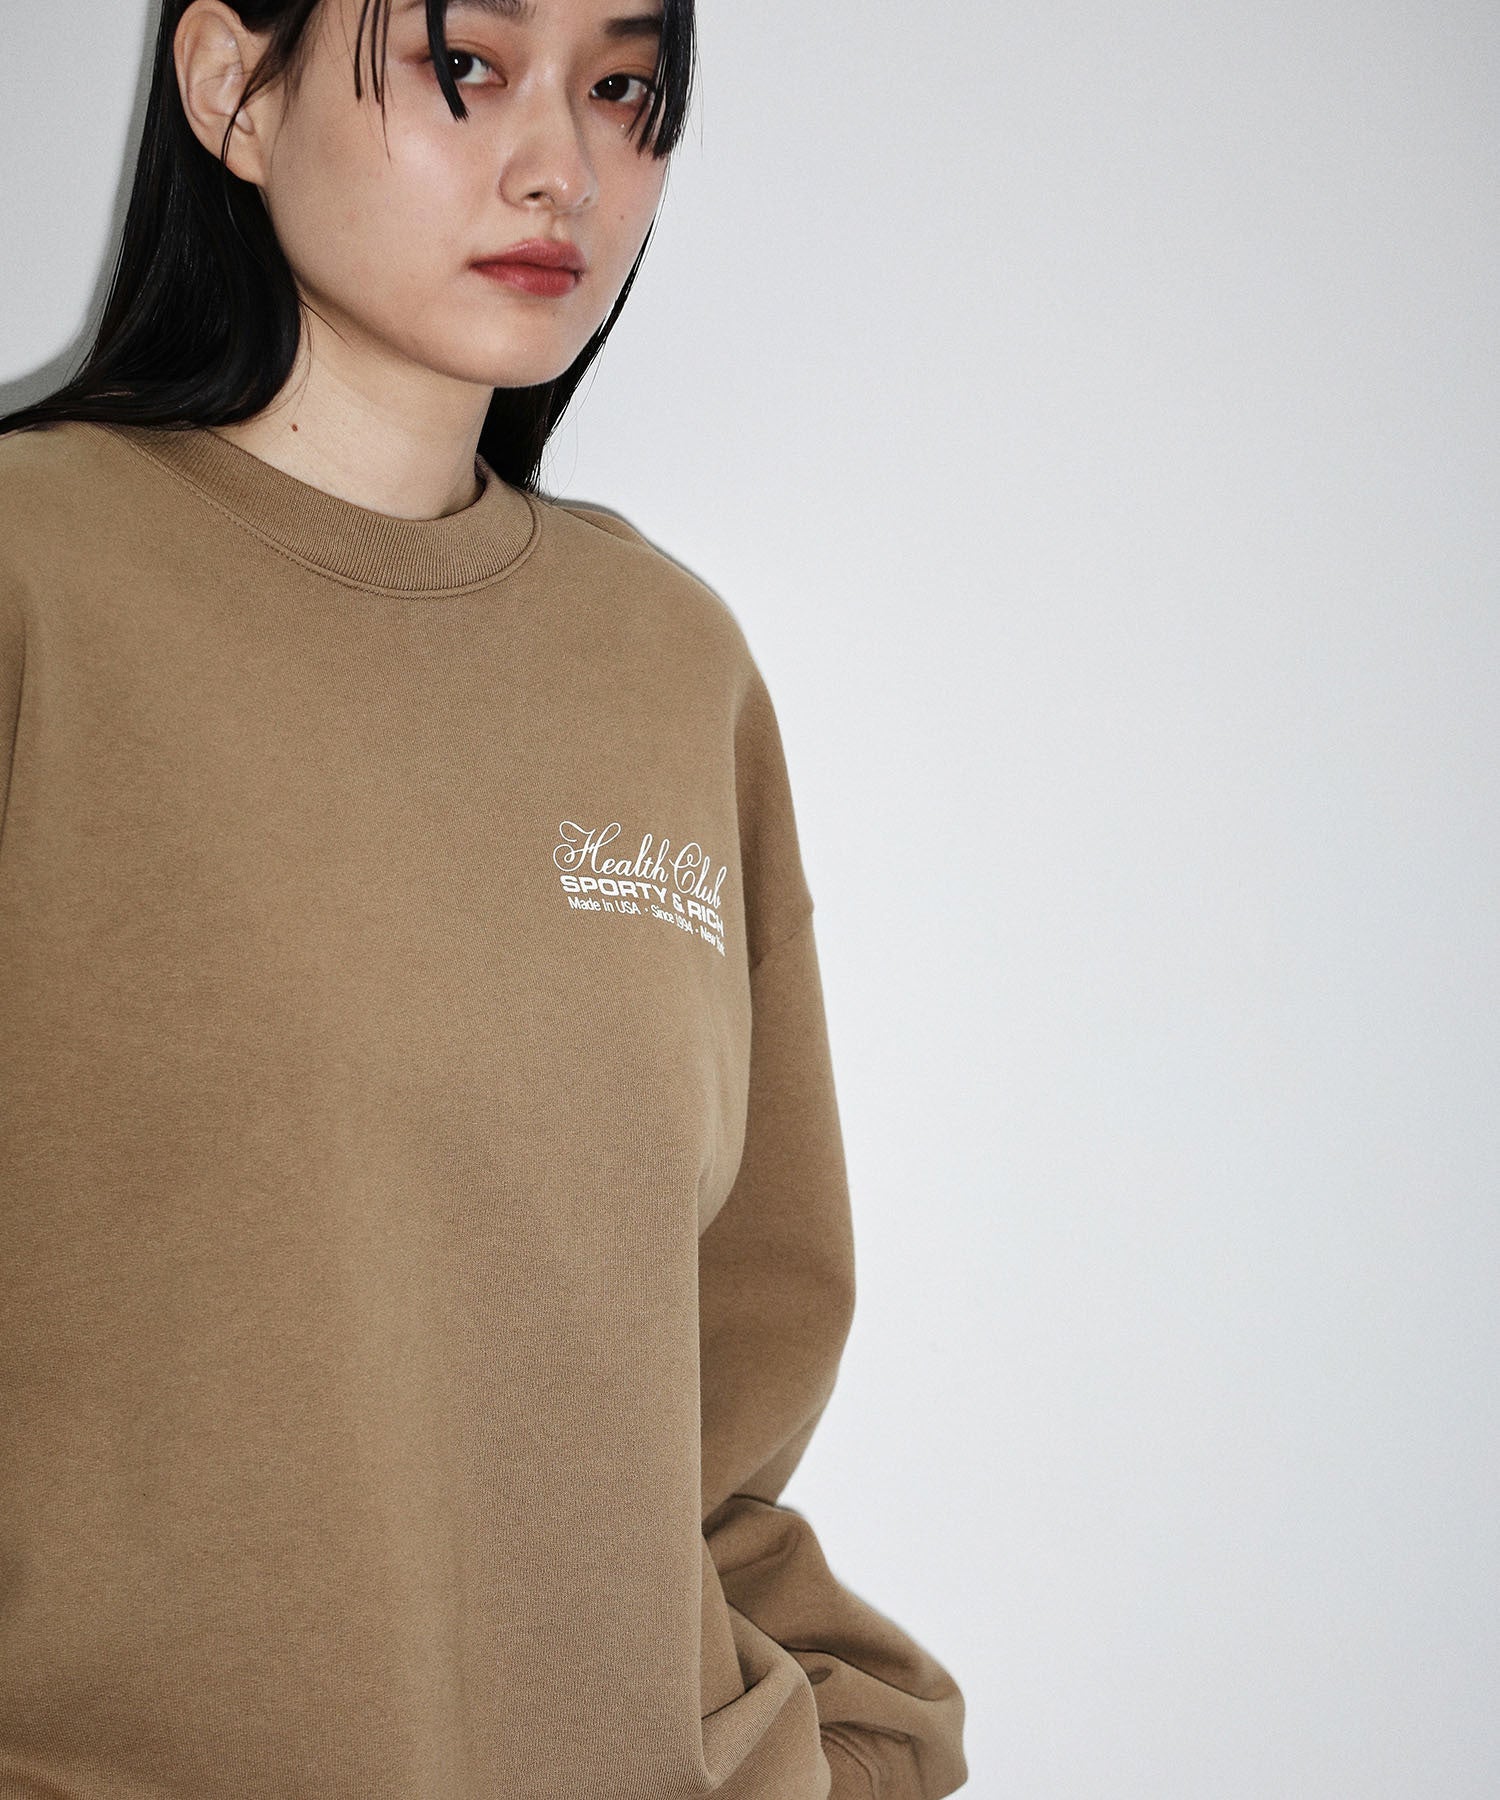 SPORTY&RICH】MADE IN USA CREWNECK ｜ ADAM ET ROPE' | アダムエロペ